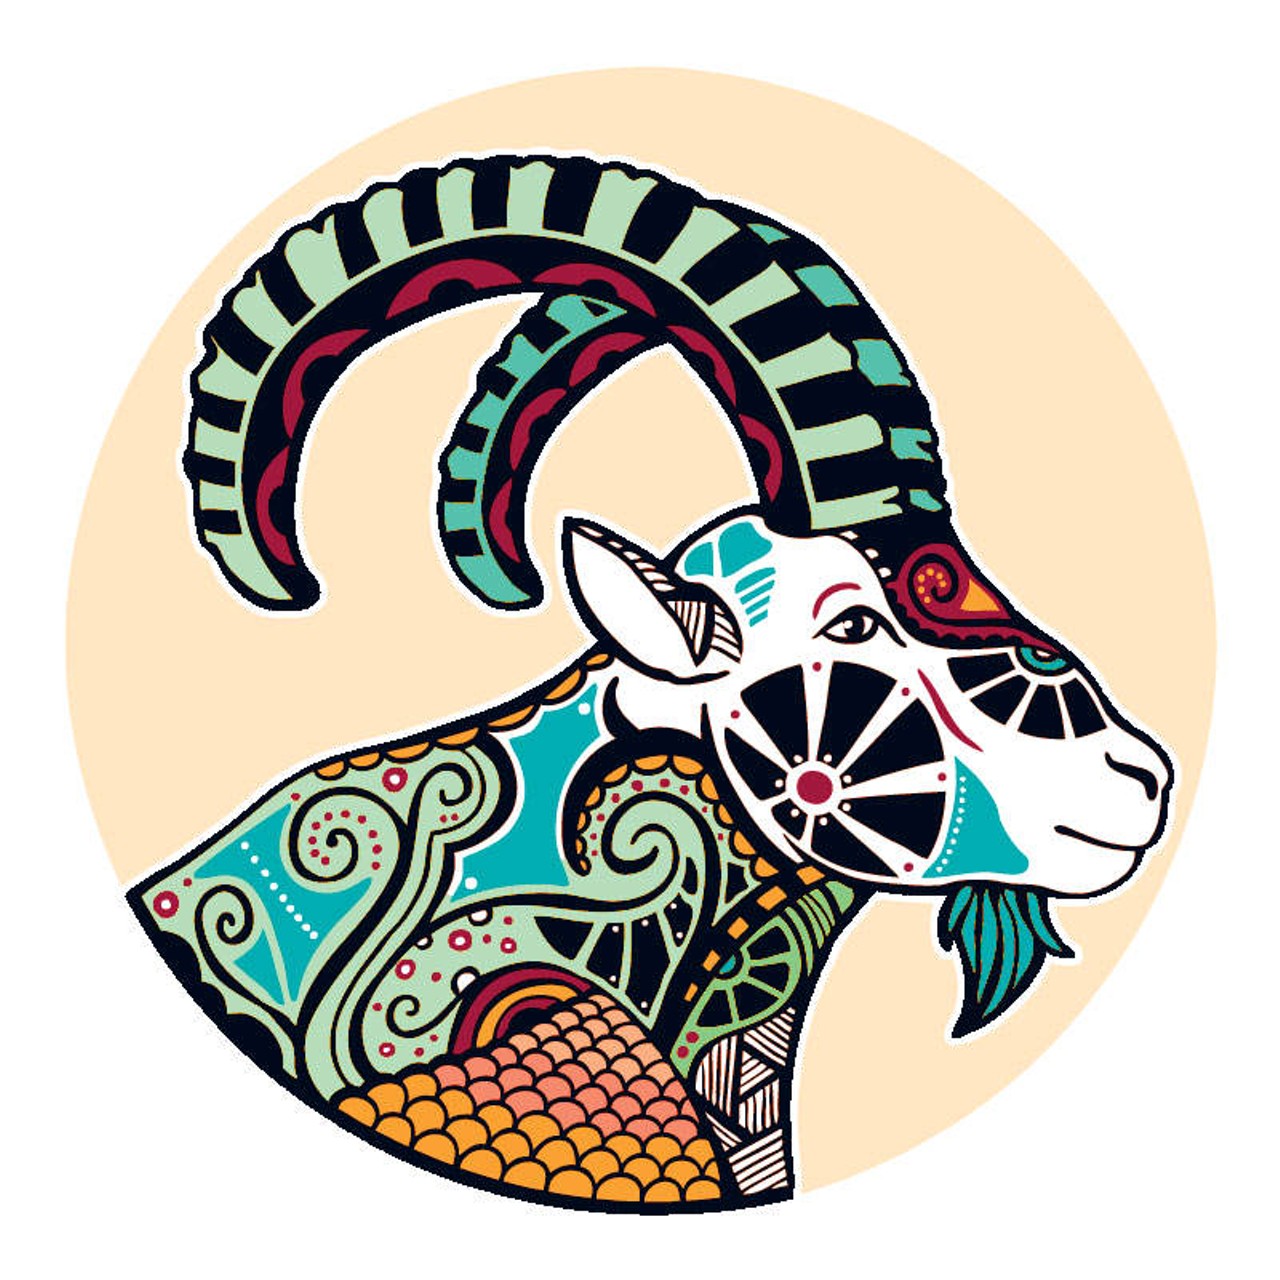 CAPRICORN: December 21 - January 20
You are back on track after too much (fill in the blanks) left you with a case of PTSD. It's amazing how good you are at maintaining your cool in situations that would put the rest of us in our grave. The deeper part of you is still ruffled by things you never expected, but your stiff upper lip keeps all of it close to your chest. Glimmers of change and hope light up what has tested all of your human and material resources. As the tide begins to turn, keep an eye on those who still have the capacity to trick you into thinking that they have your best interests in mind.